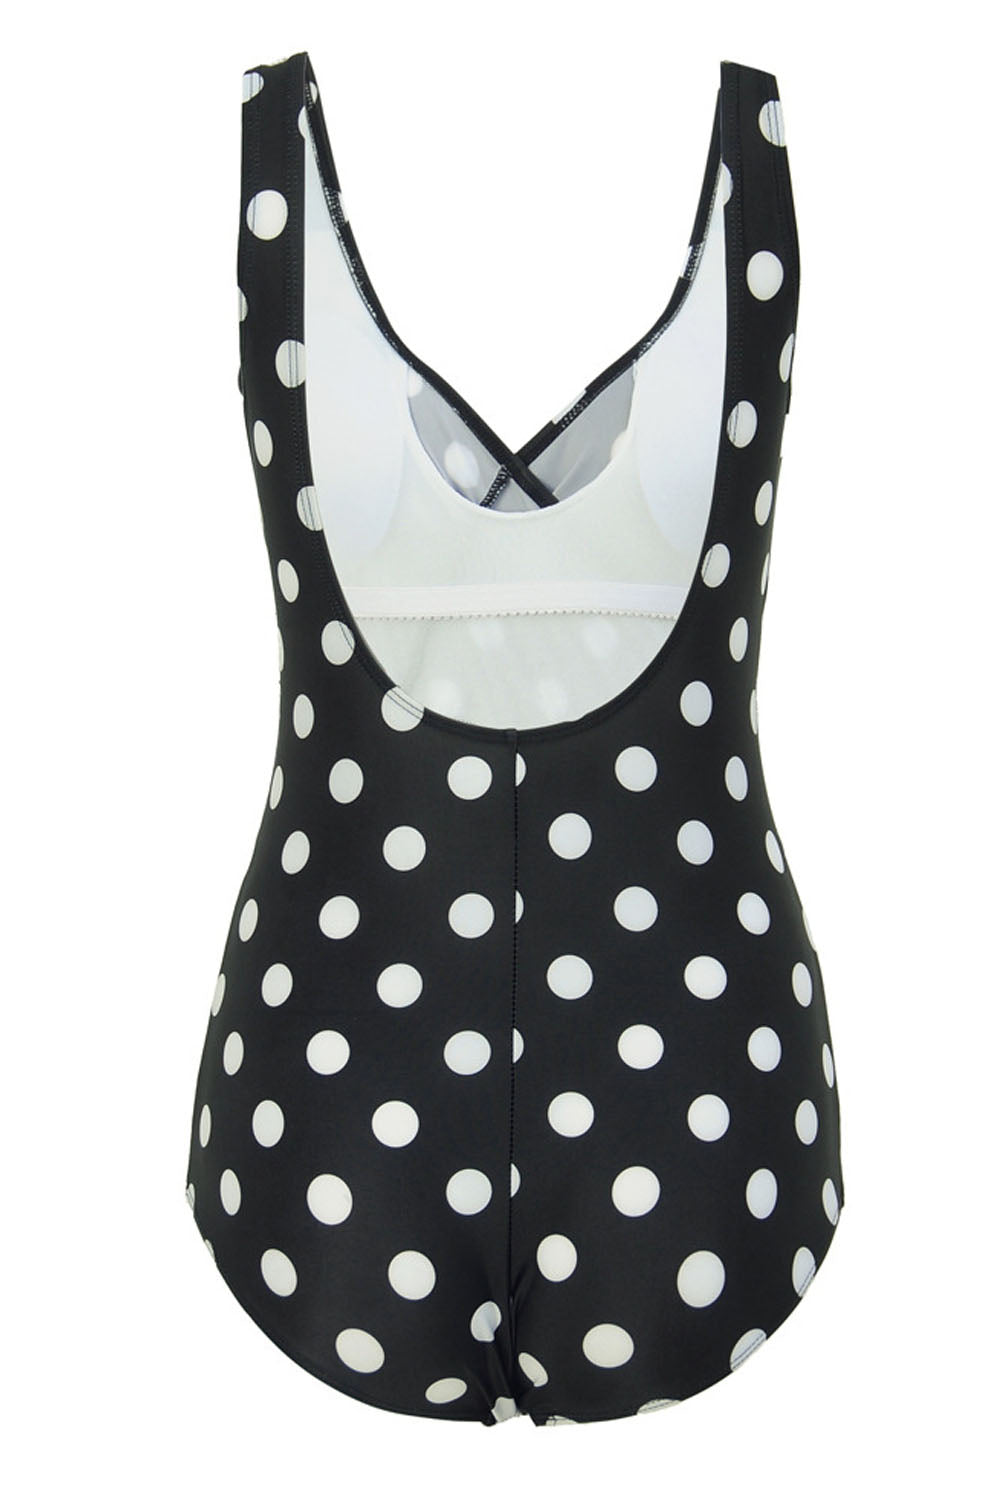 Iyasson Womens Sexy Solid Color/Polka Dot One-piece Swimsuit